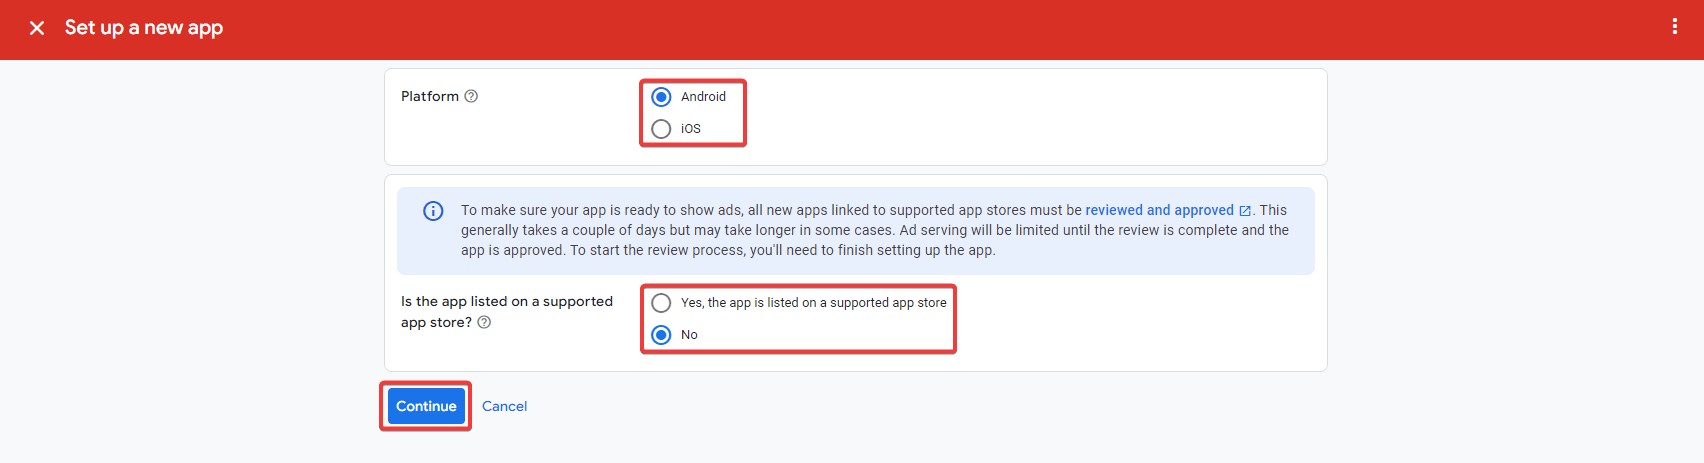 Google AdMob selecting platform and supported app store